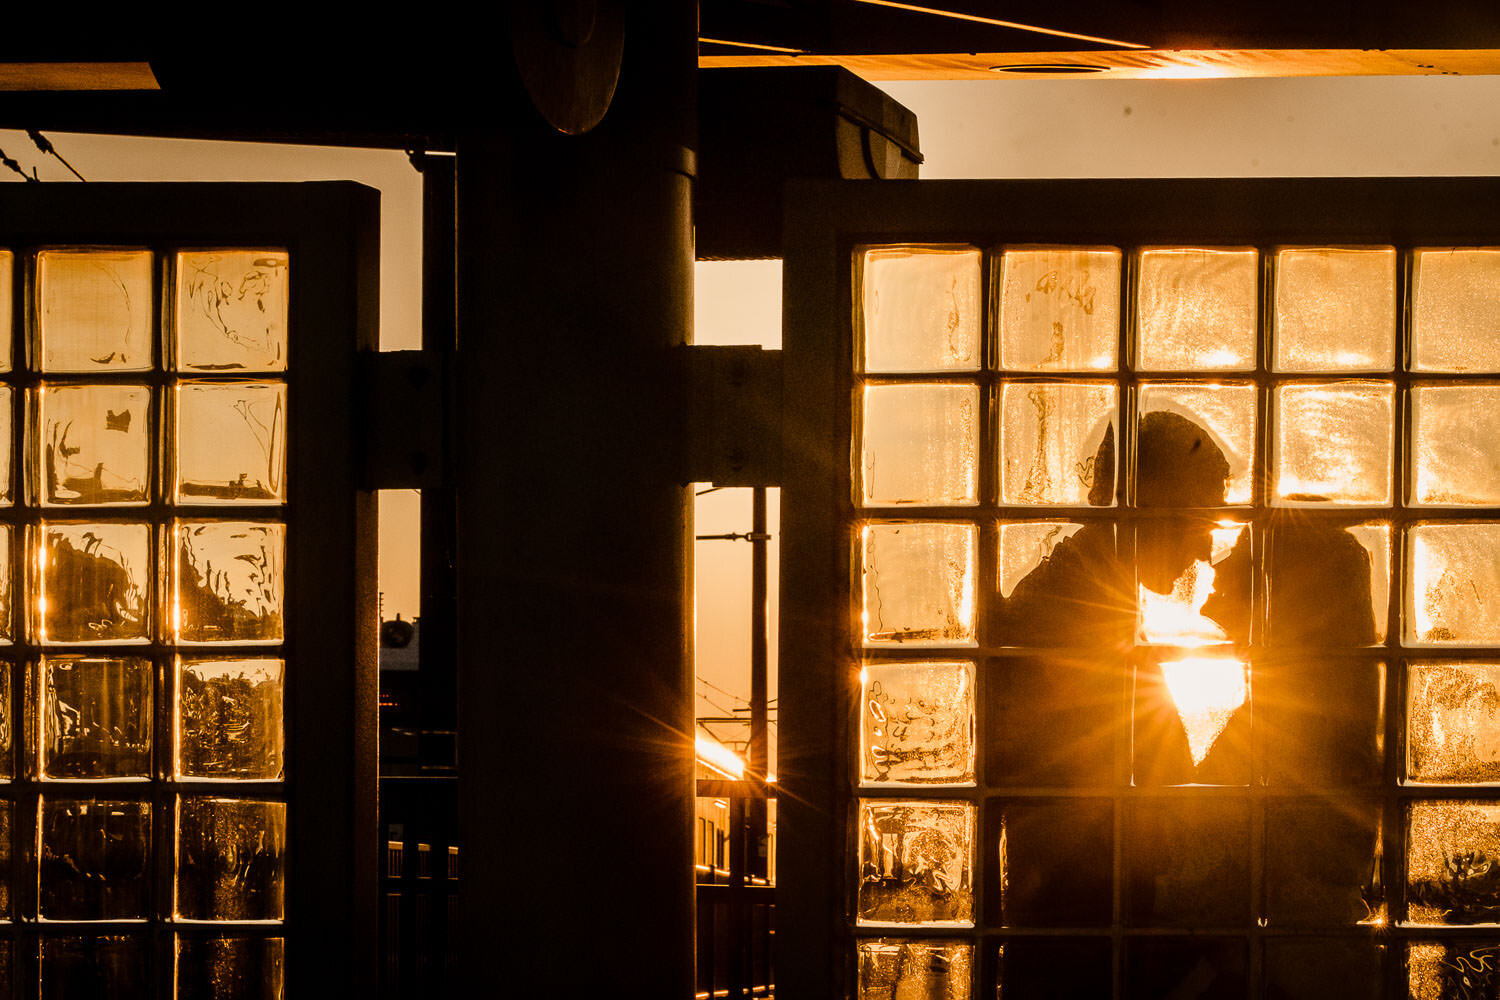 Couple's silhouette portrait at sunset at Hoboken train station